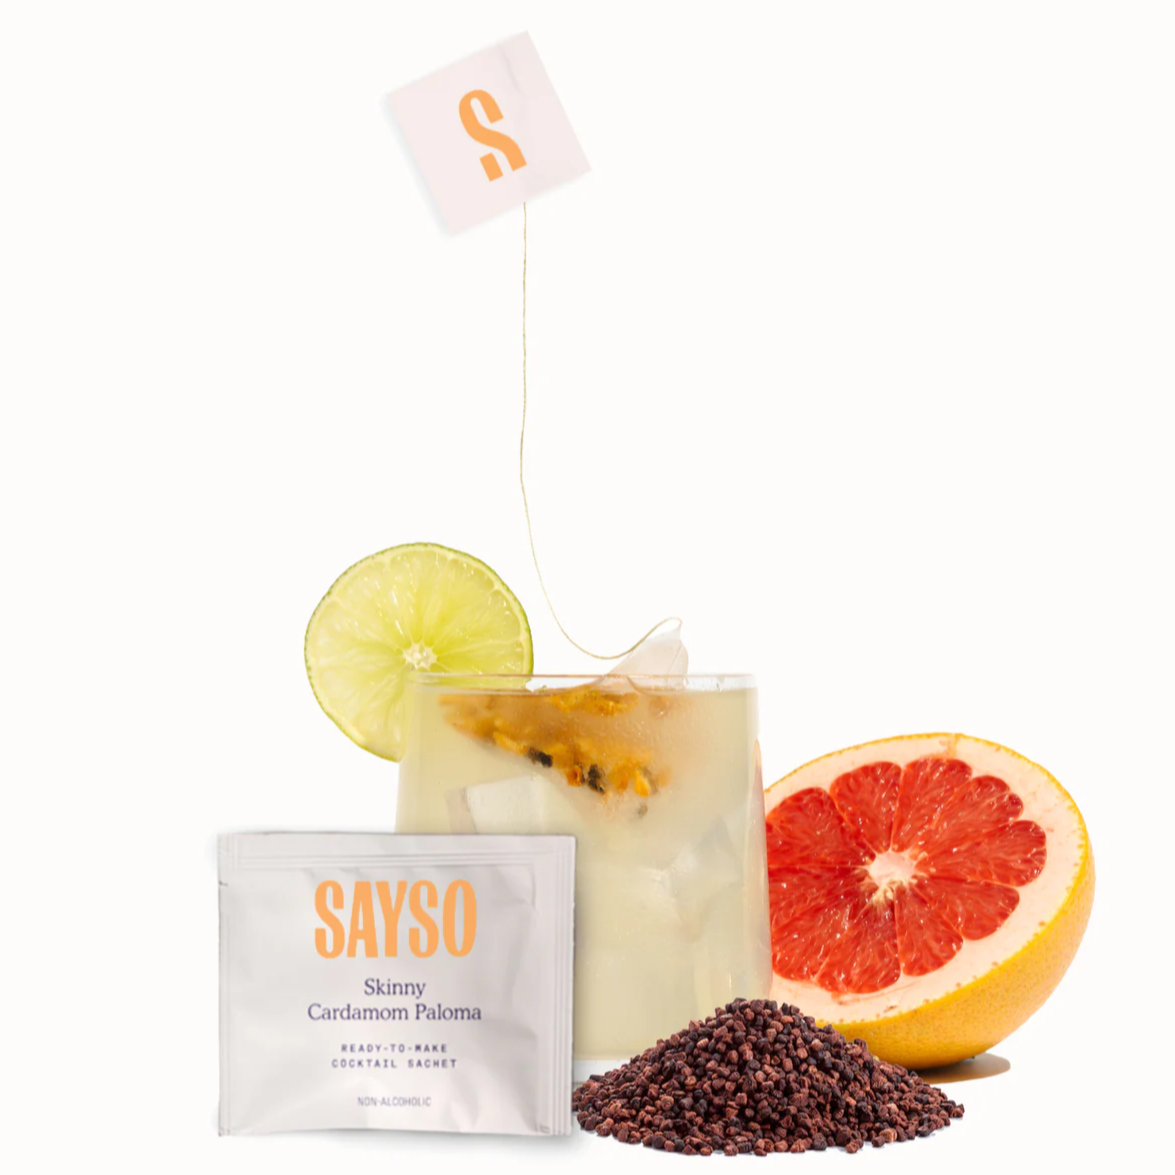 SAYSO Skinny Cardamom Paloma sachet with a Paloma cocktail in the background and a grapefruit to the right.